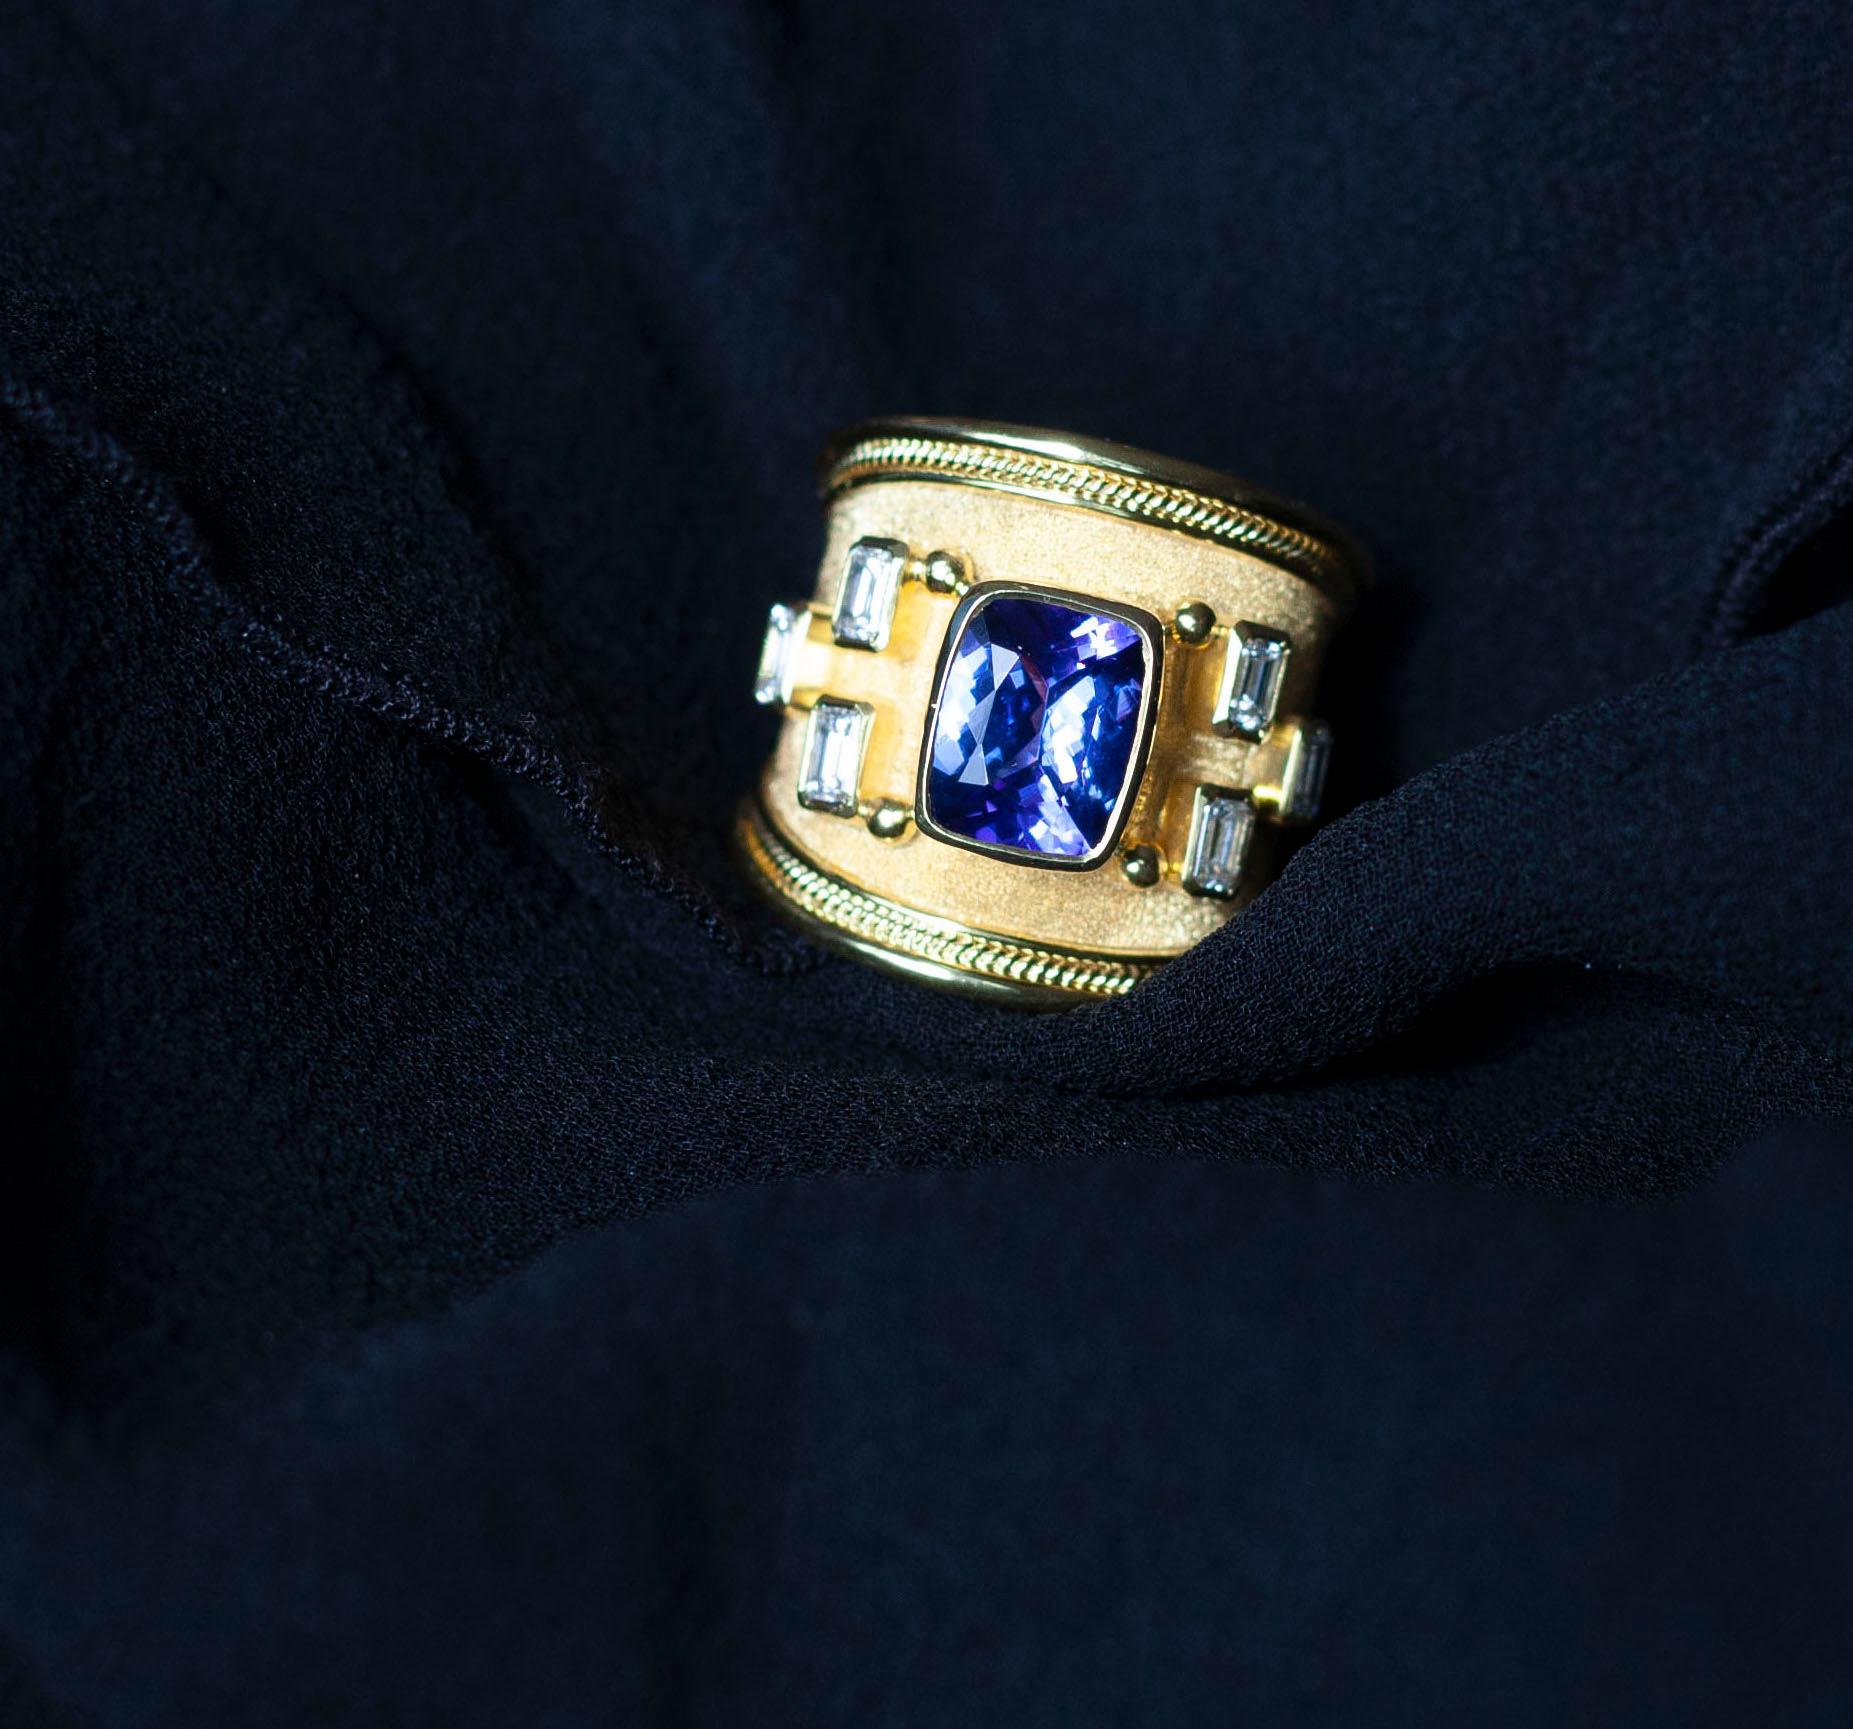 Unique S.Georgios designer 18 Karat Solid Yellow Gold Ring all handmade with a Byzantine Granulation Workmanship and a unique velvet background. The ring has 1 center Cushion Cut Tanzanite total weight of 3,32Carats and 6 Emerald cut White Diamonds